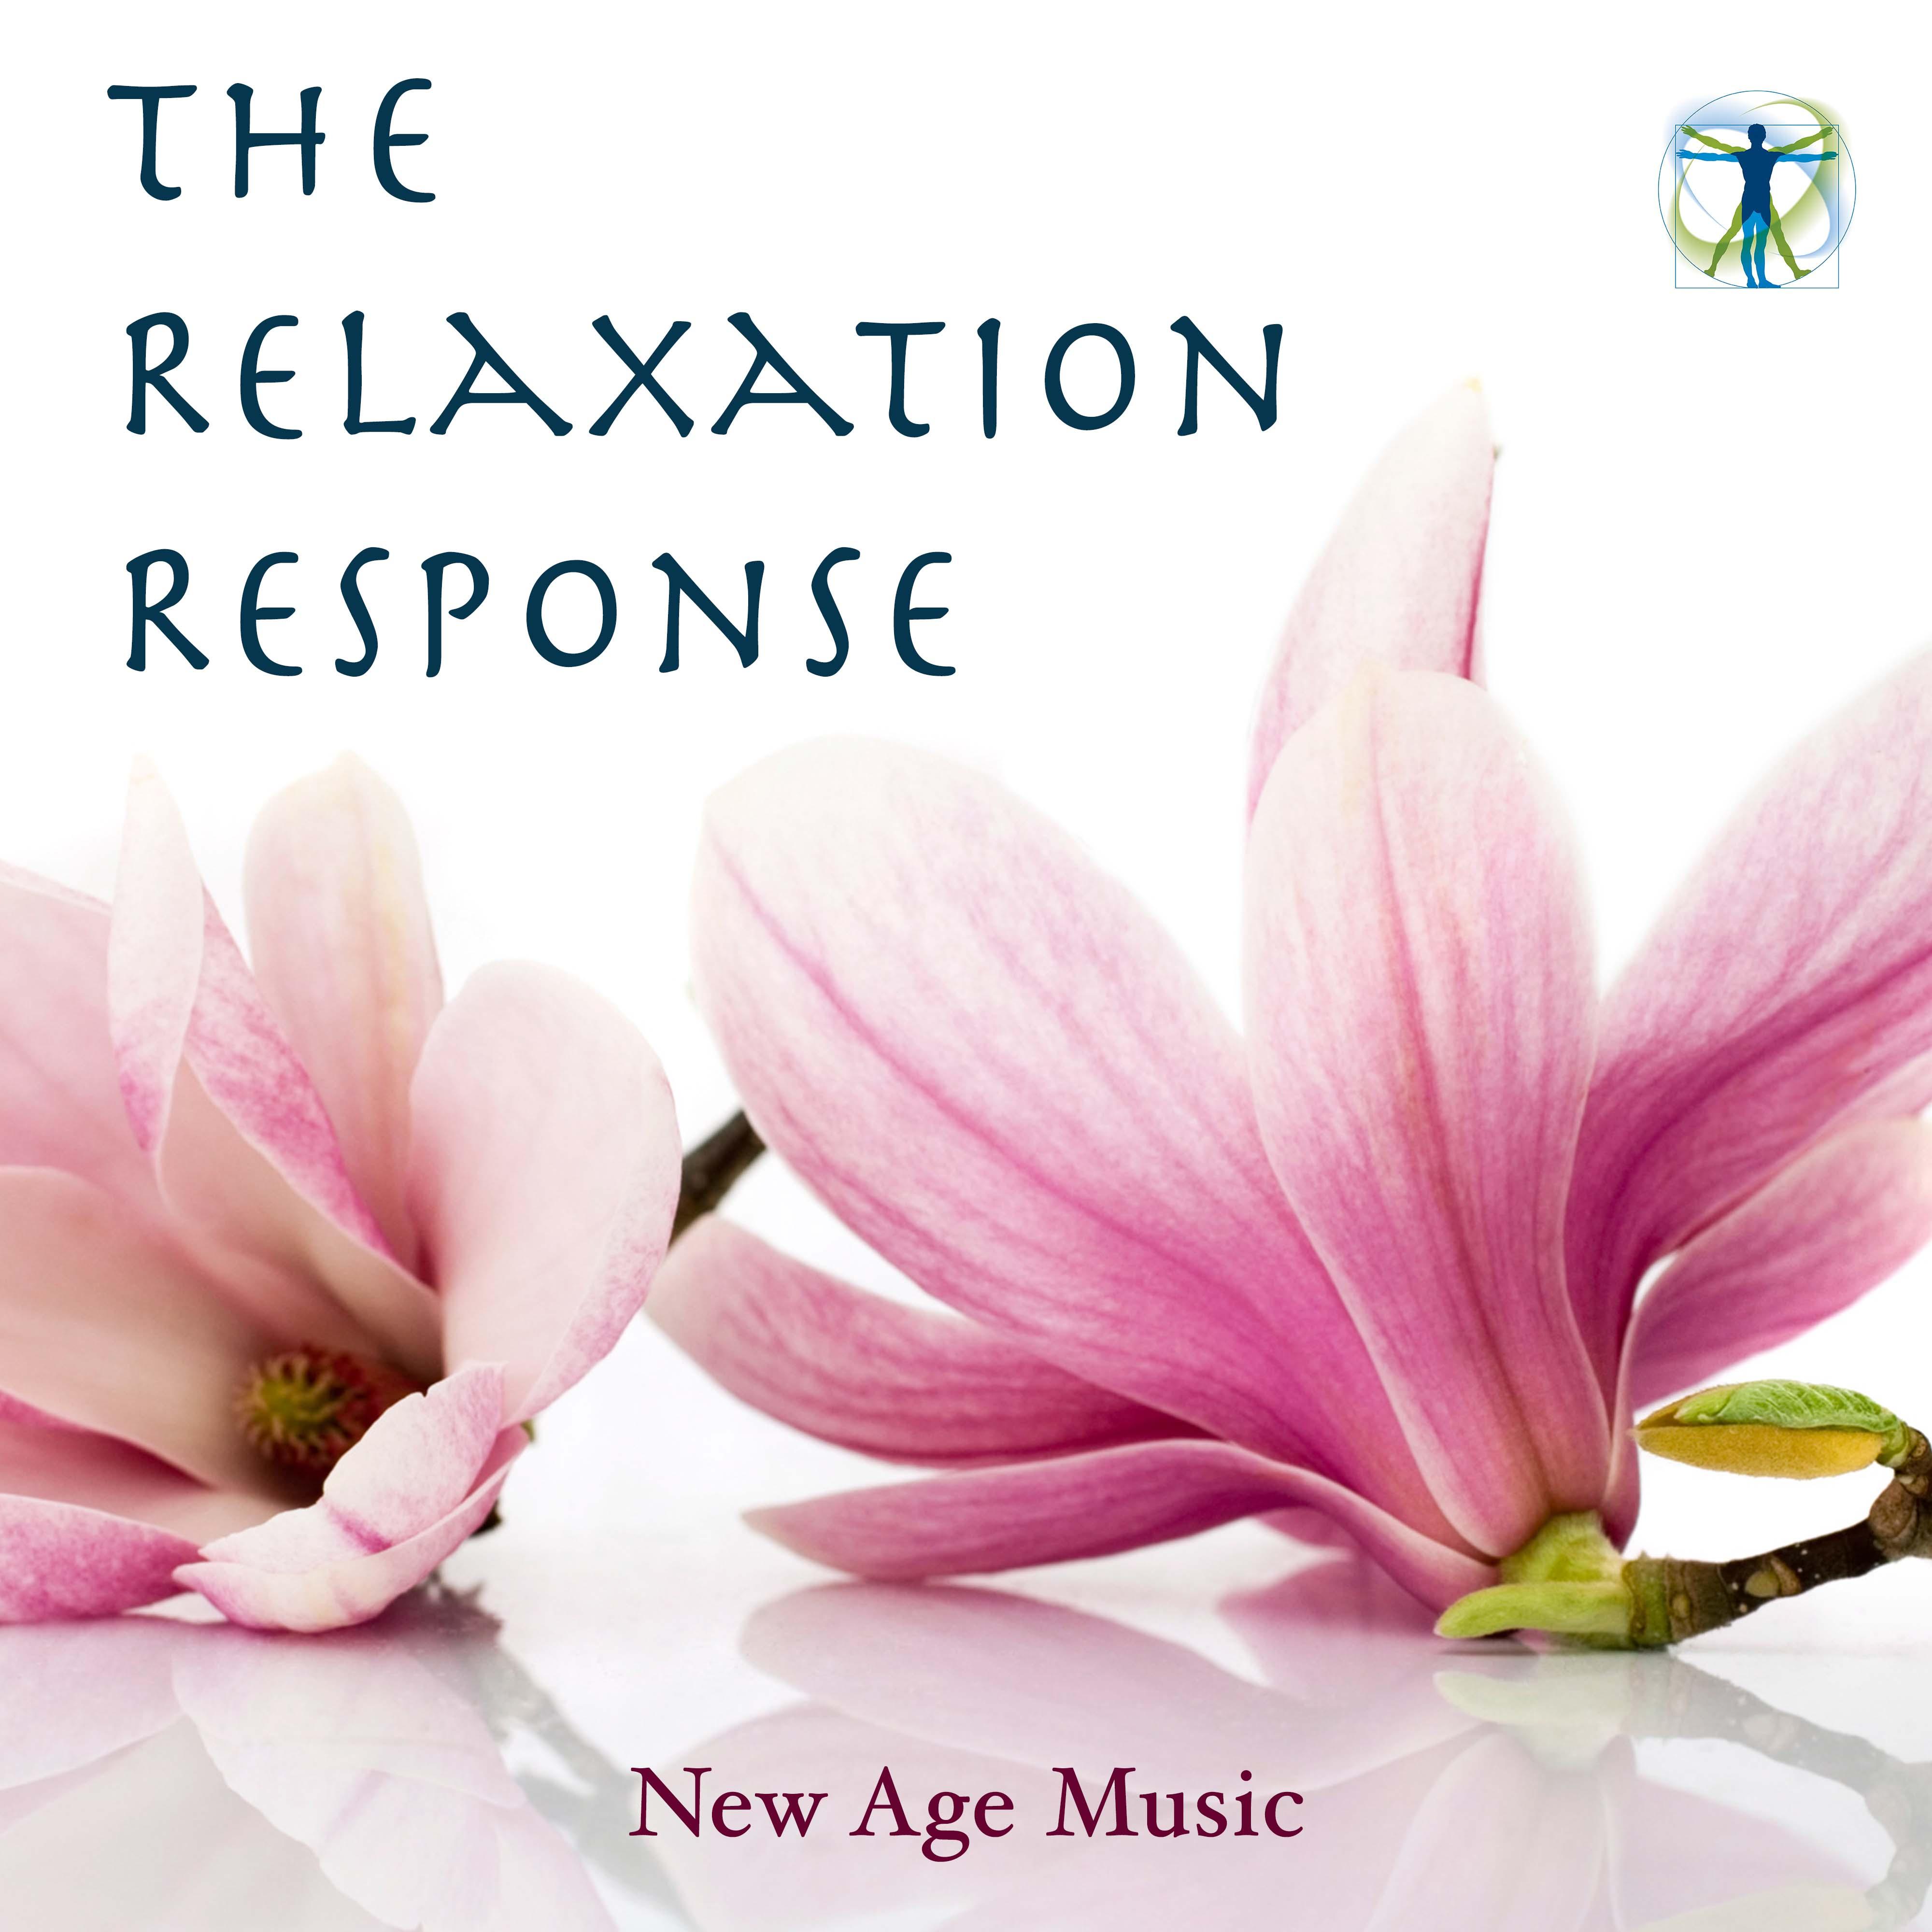 The Relaxation Response